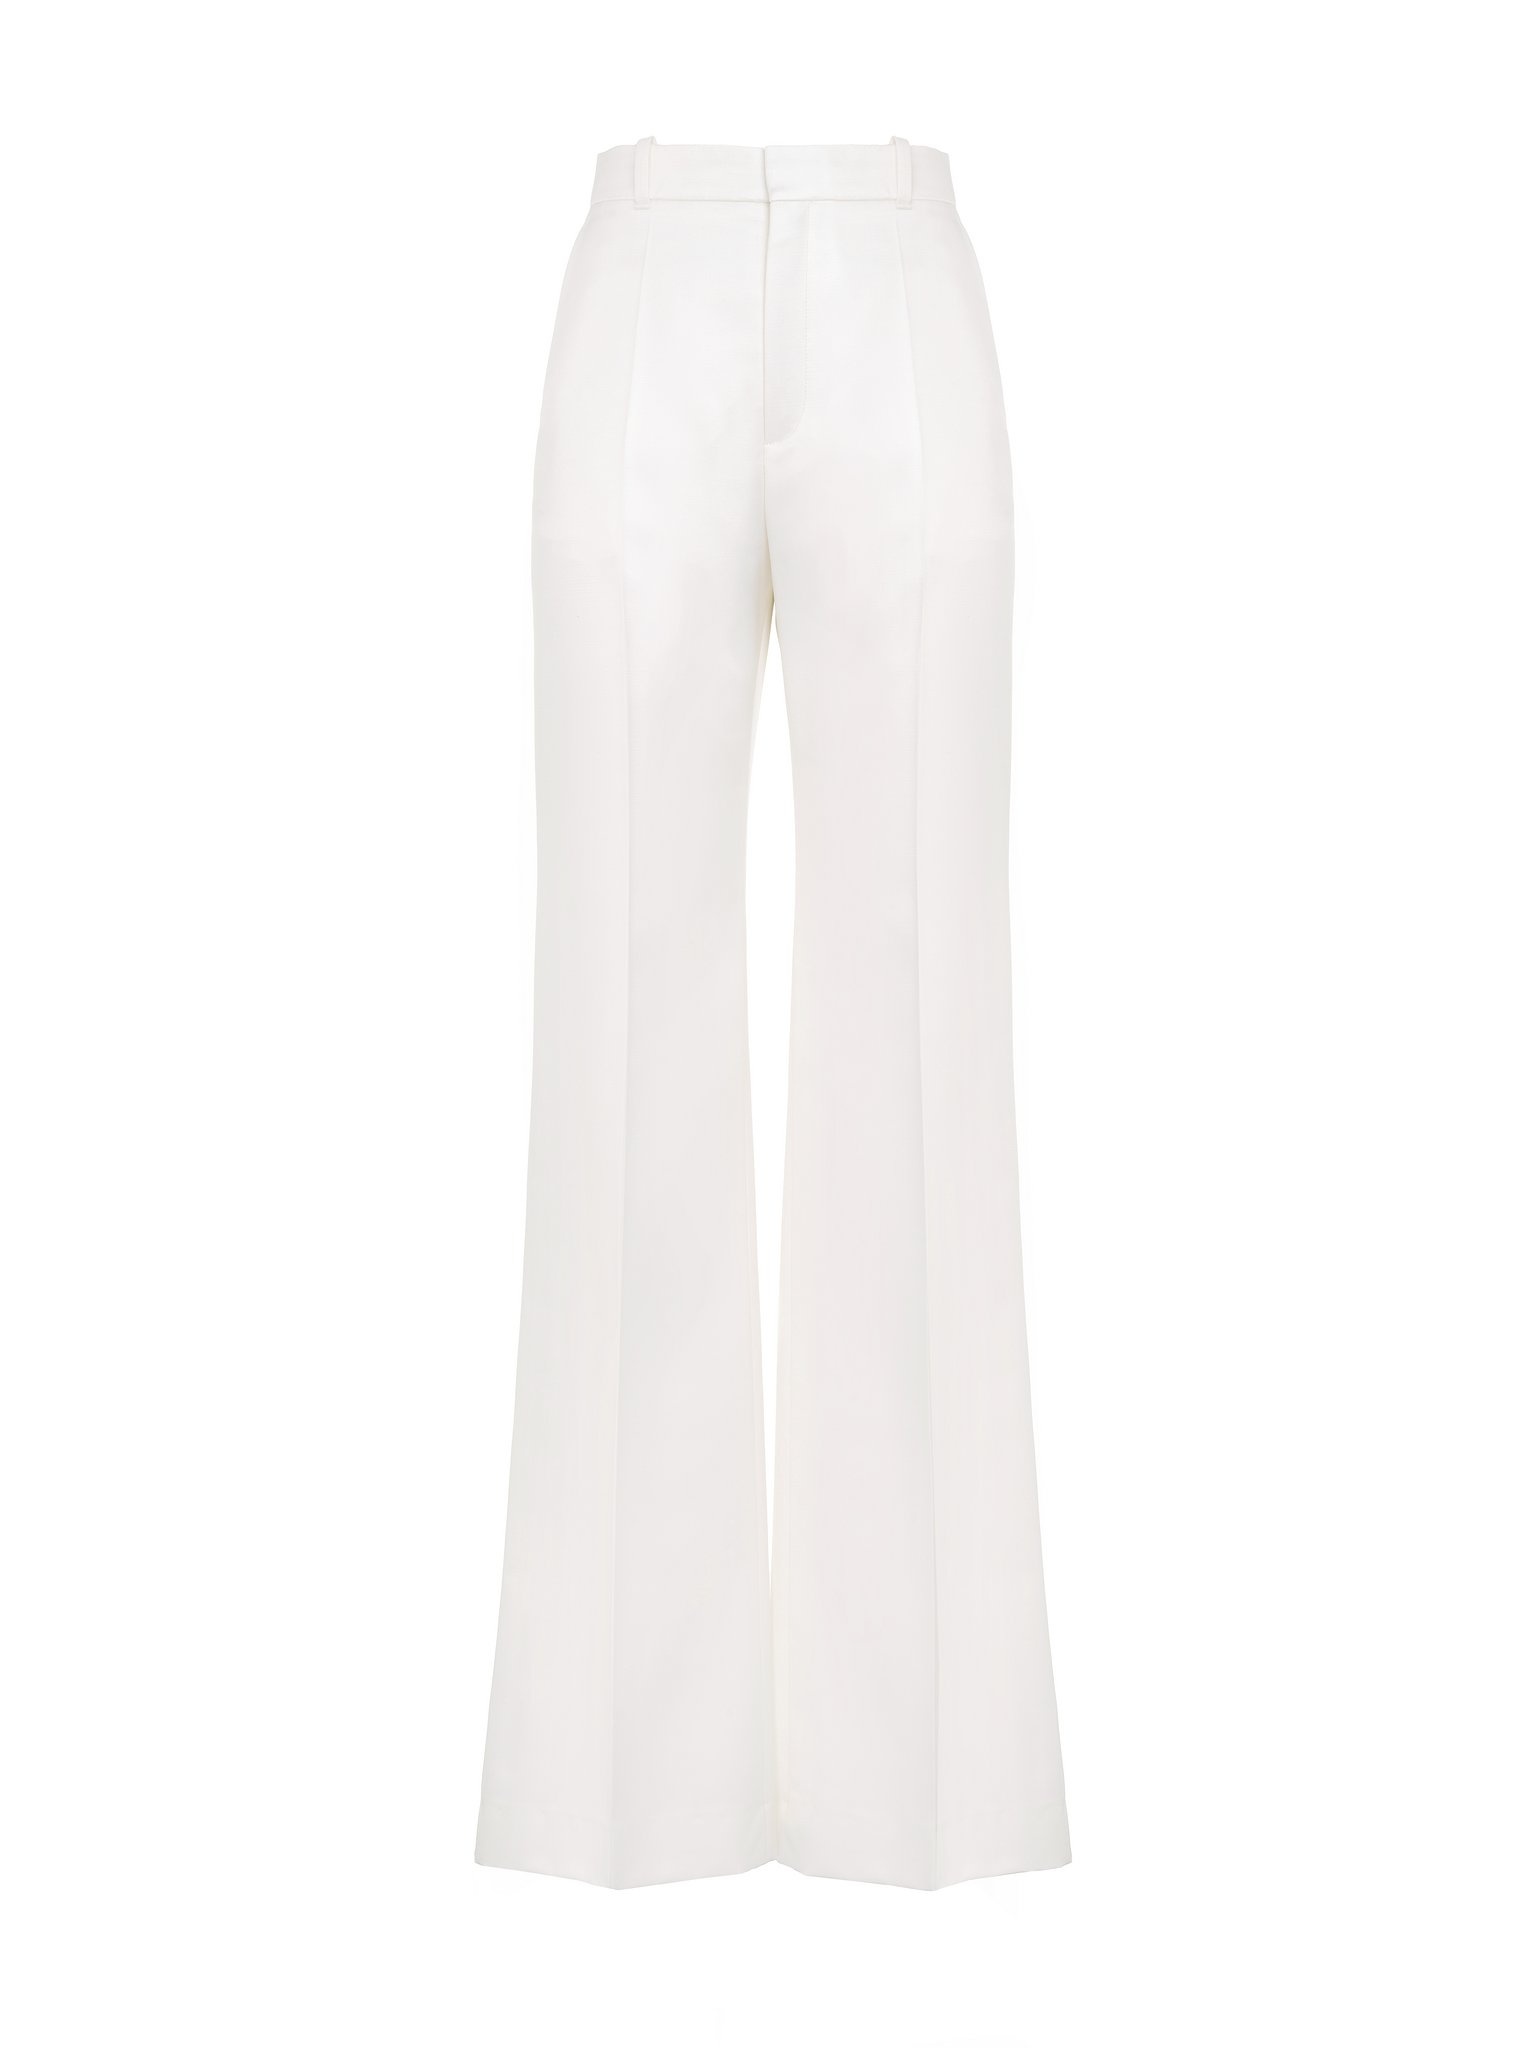 HIGH-RISE TAILORED PANTS - 1